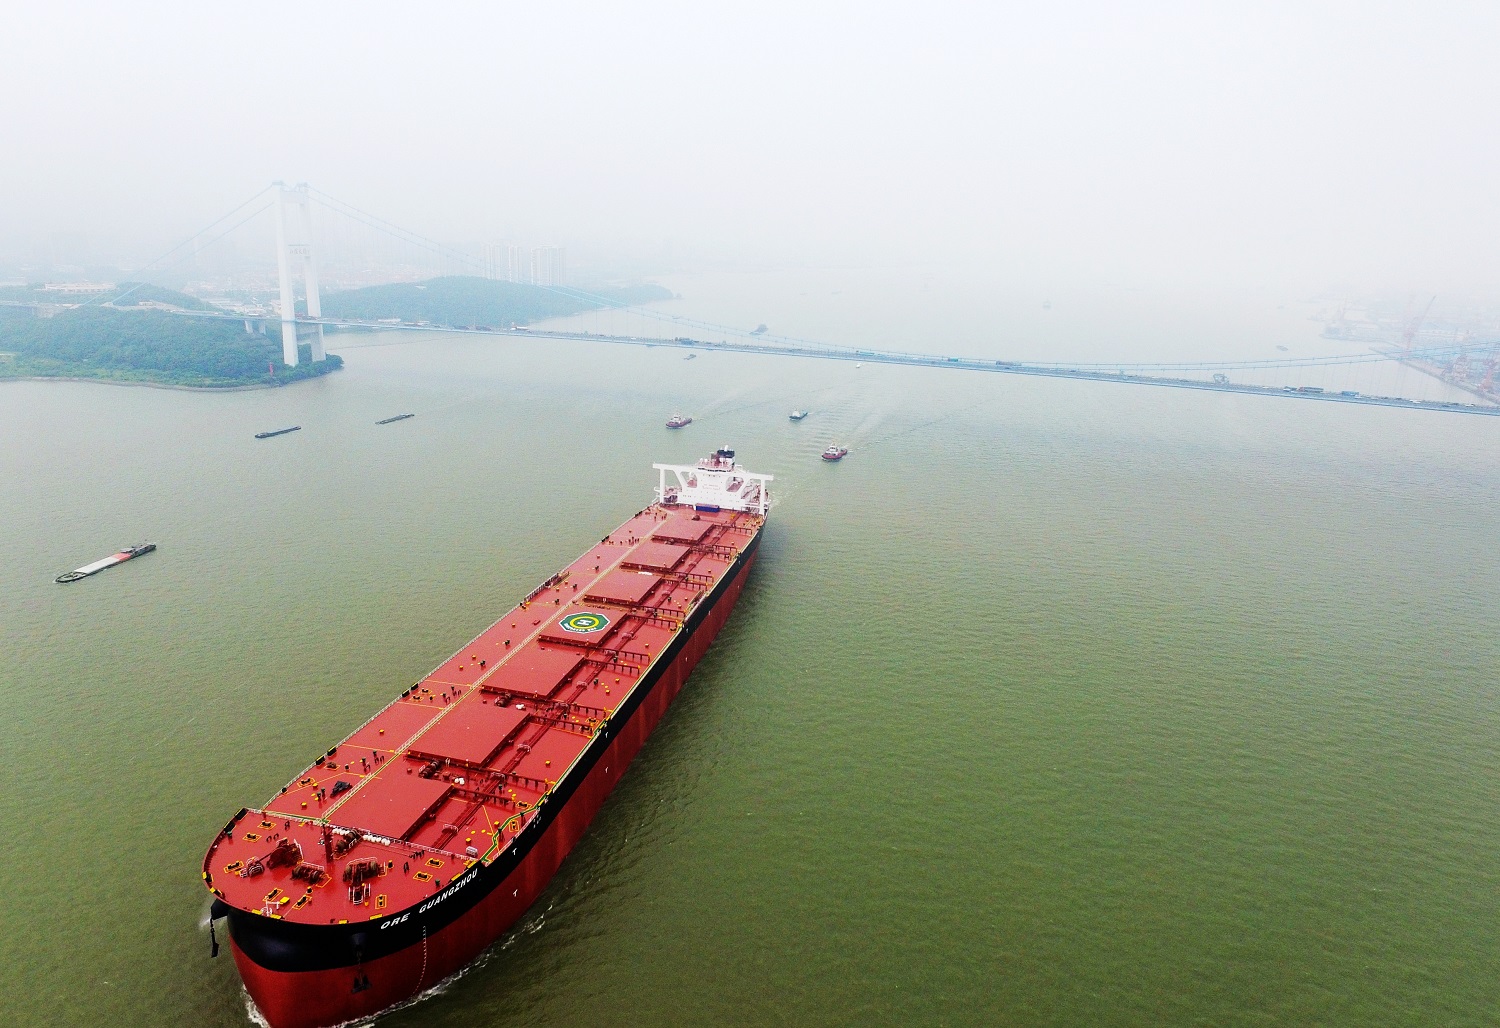 Escort "Jiangyin made" largest ore carrier in the worl